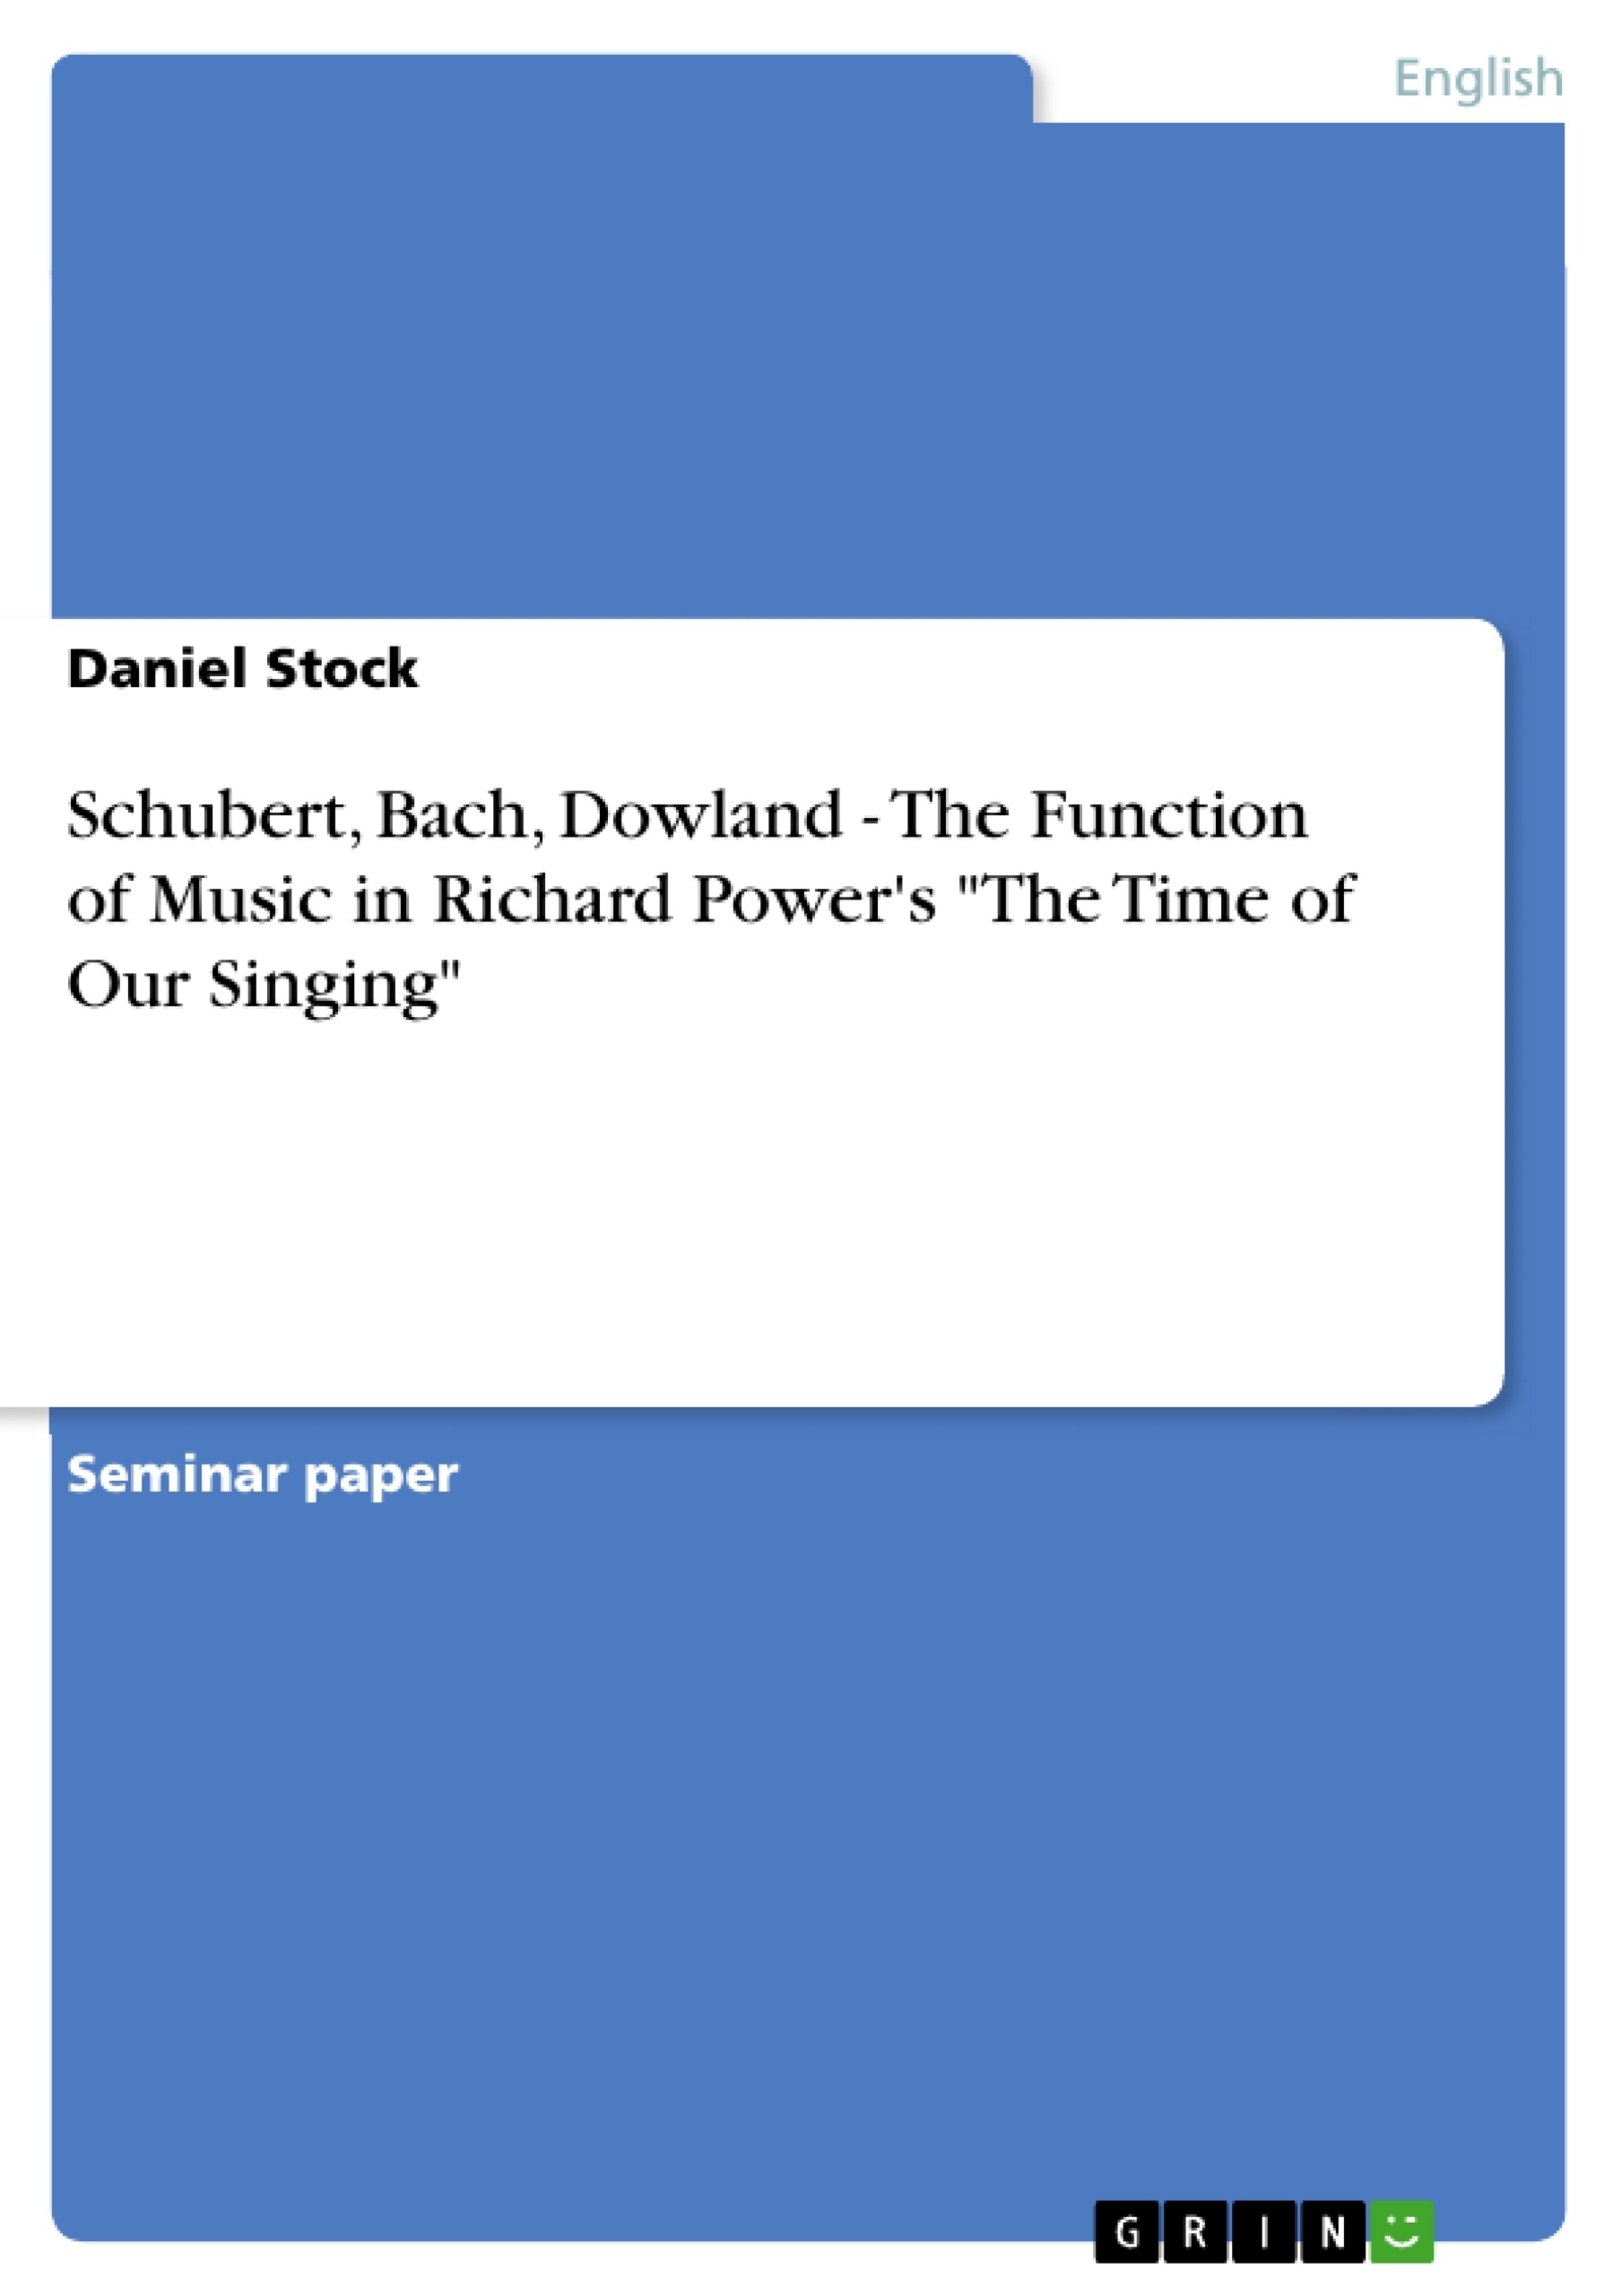 Title: Schubert, Bach, Dowland - The Function of Music in Richard Power's "The Time of Our Singing"